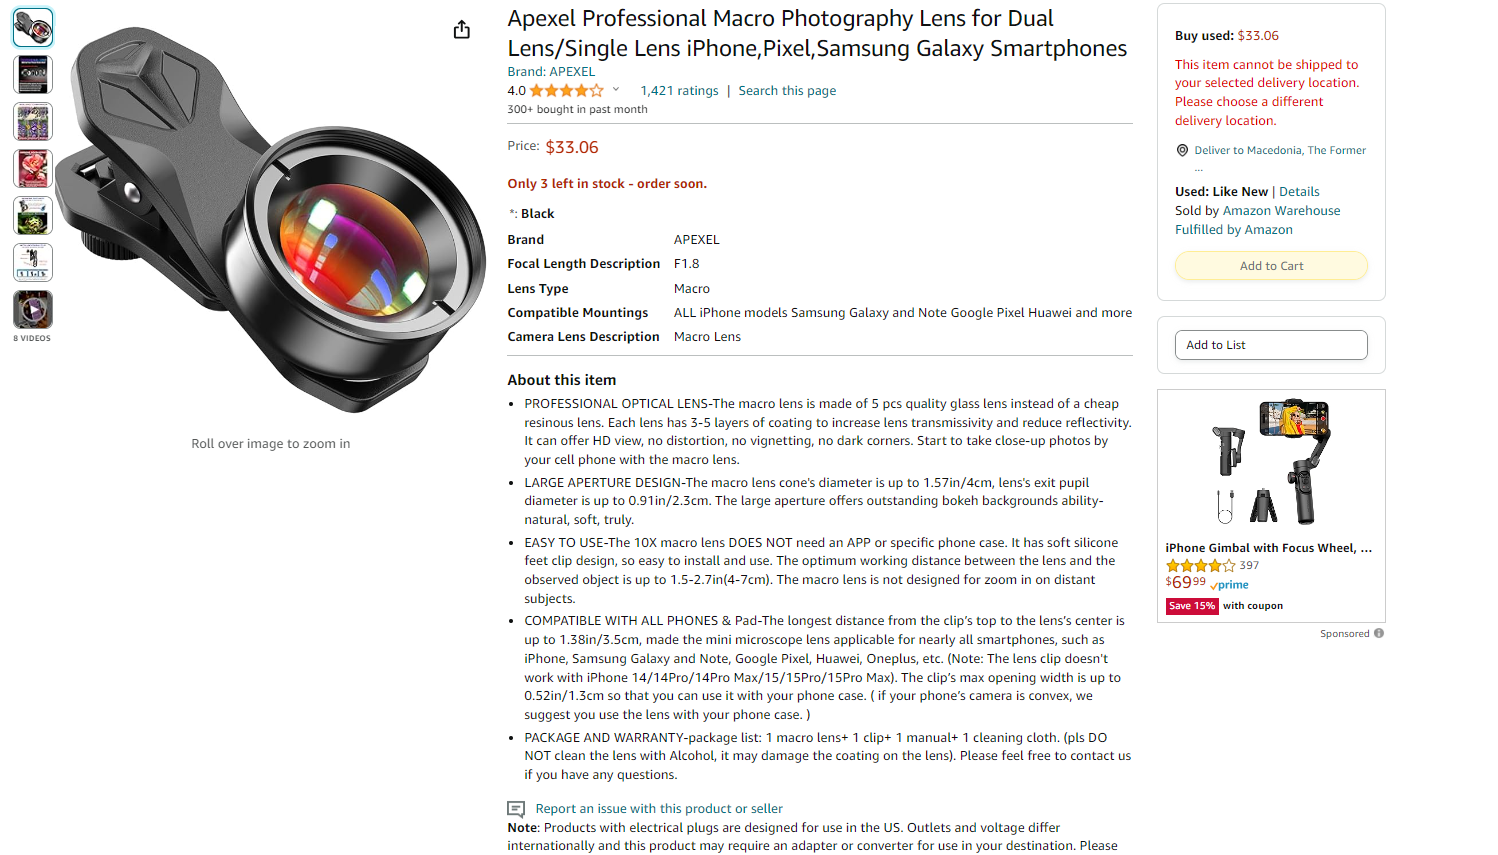 Phone lenses are popular among amateur photographers and social media enthusiasts looking to enhance their smartphone photography.